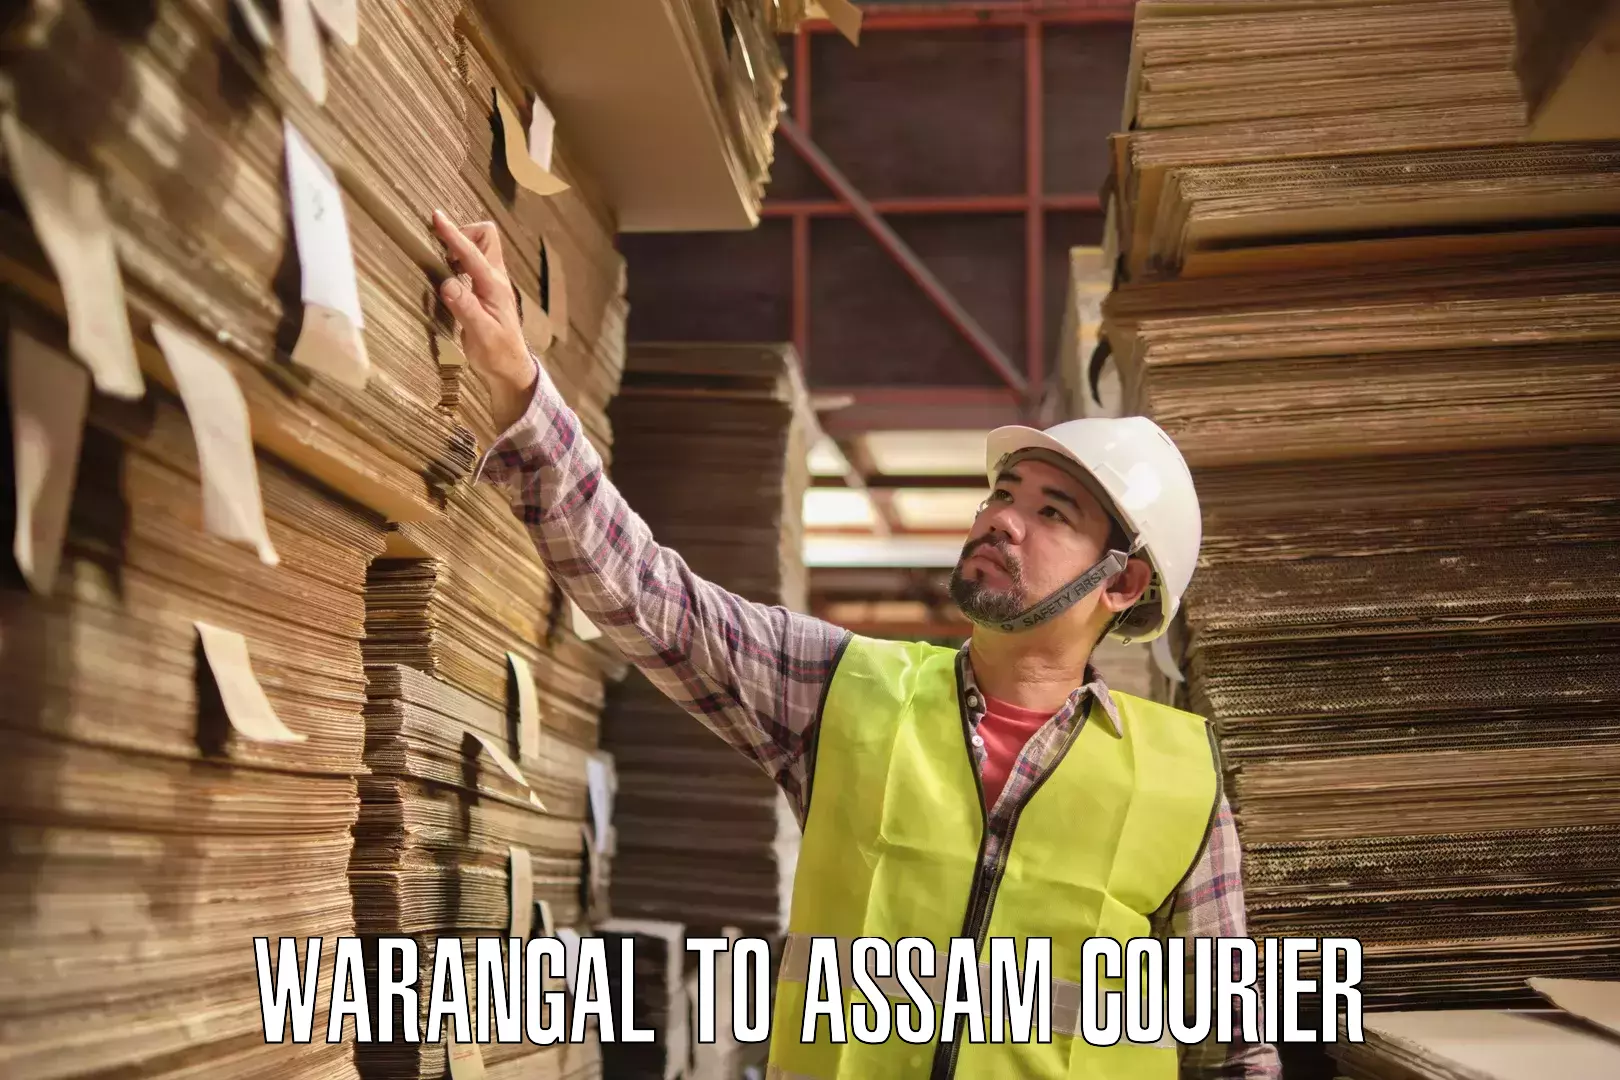 User-friendly delivery service Warangal to Assam